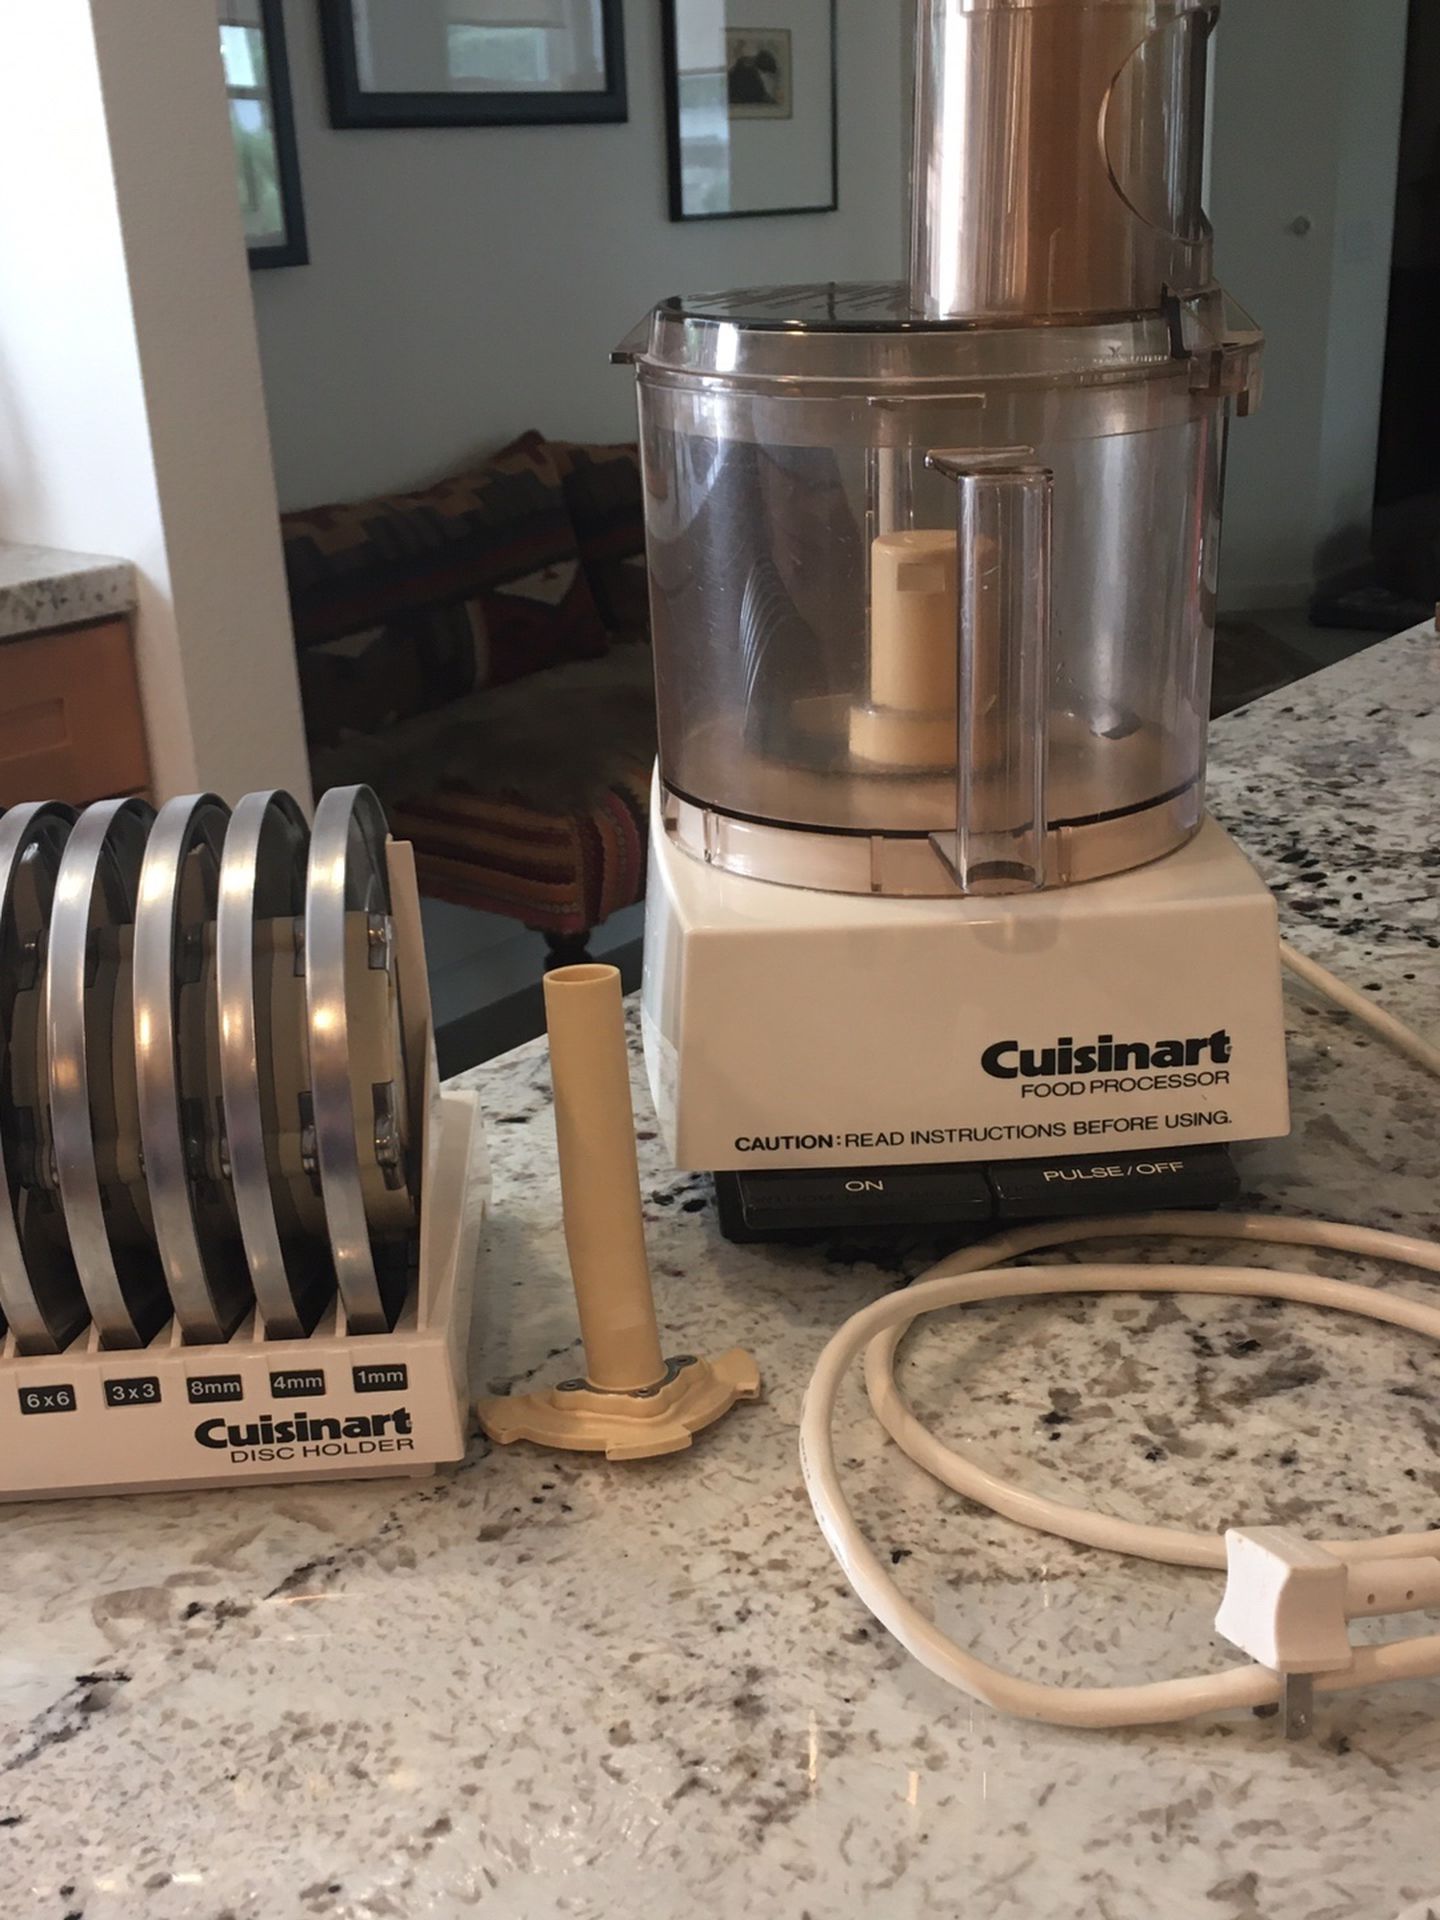 Vintage Pro Food Processor (14 Cup) With Blades Made In Japan for Sale in Poway, CA OfferUp